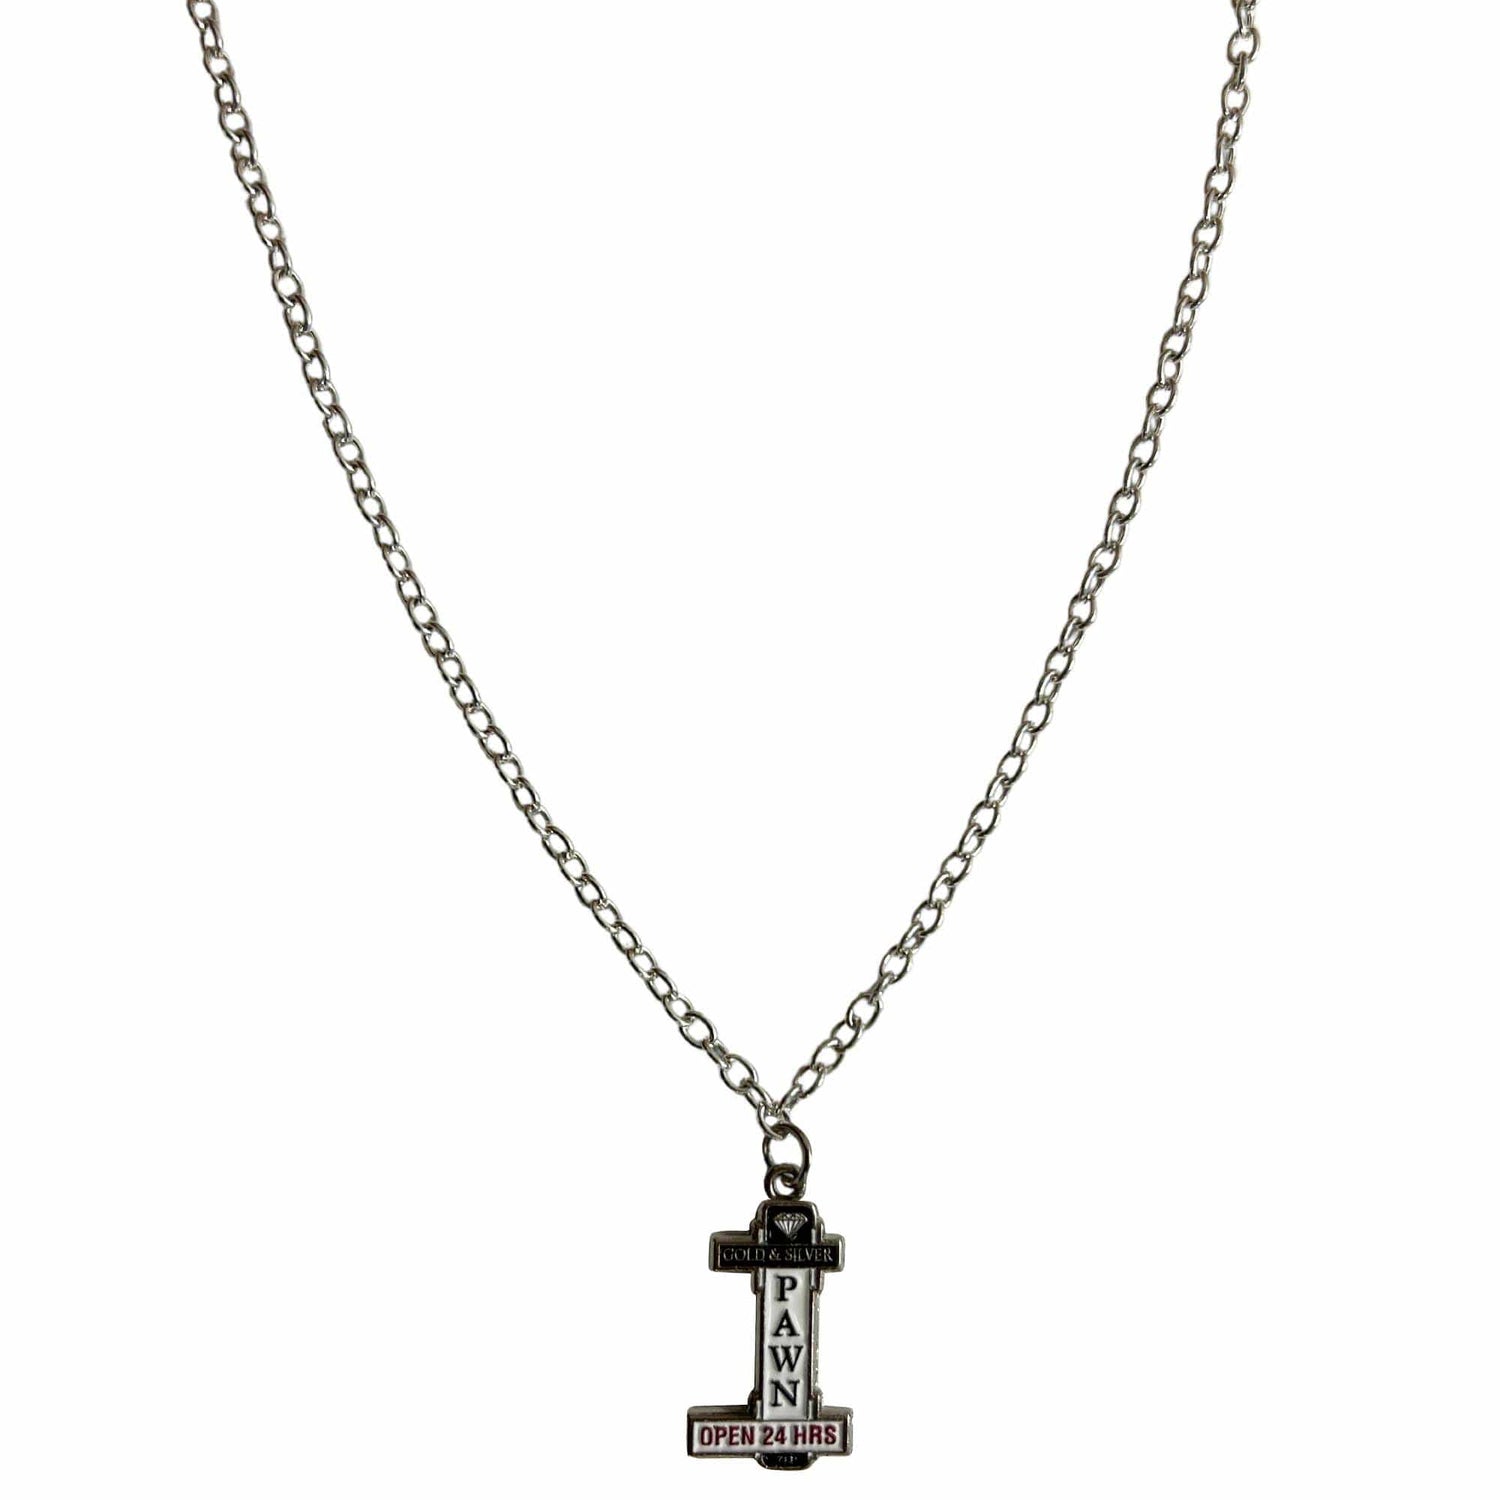 Gold & Silver Pawn Shop Sign Necklace ZOOM